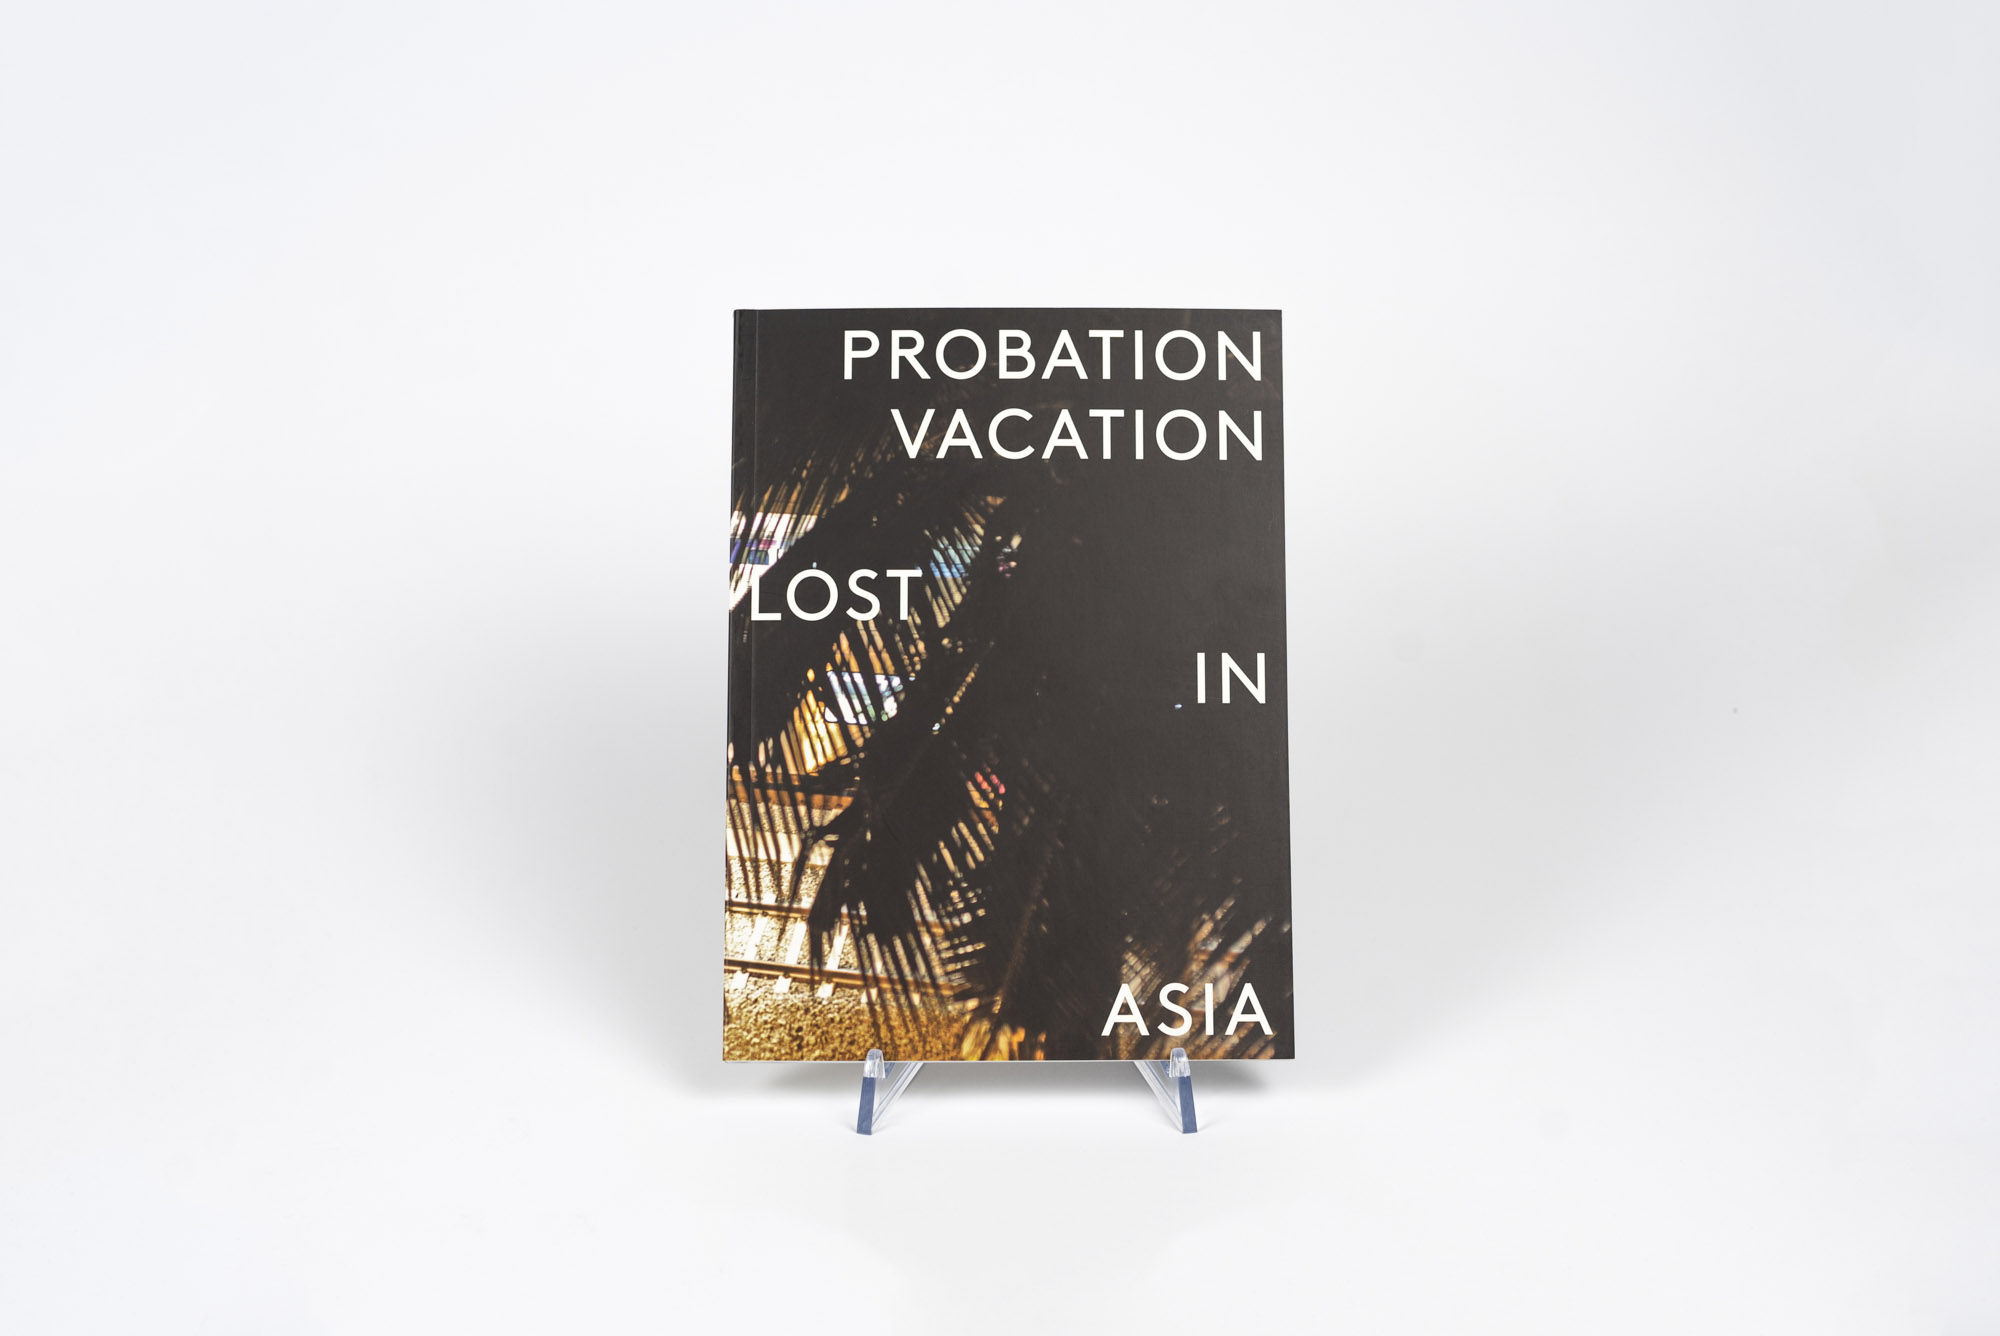 UTAH_ETHER_PROBATION_VACATION_LOST_IN_ASIA_BOOK_THE_GRIFTERS_PUBLISHING-32.jpg